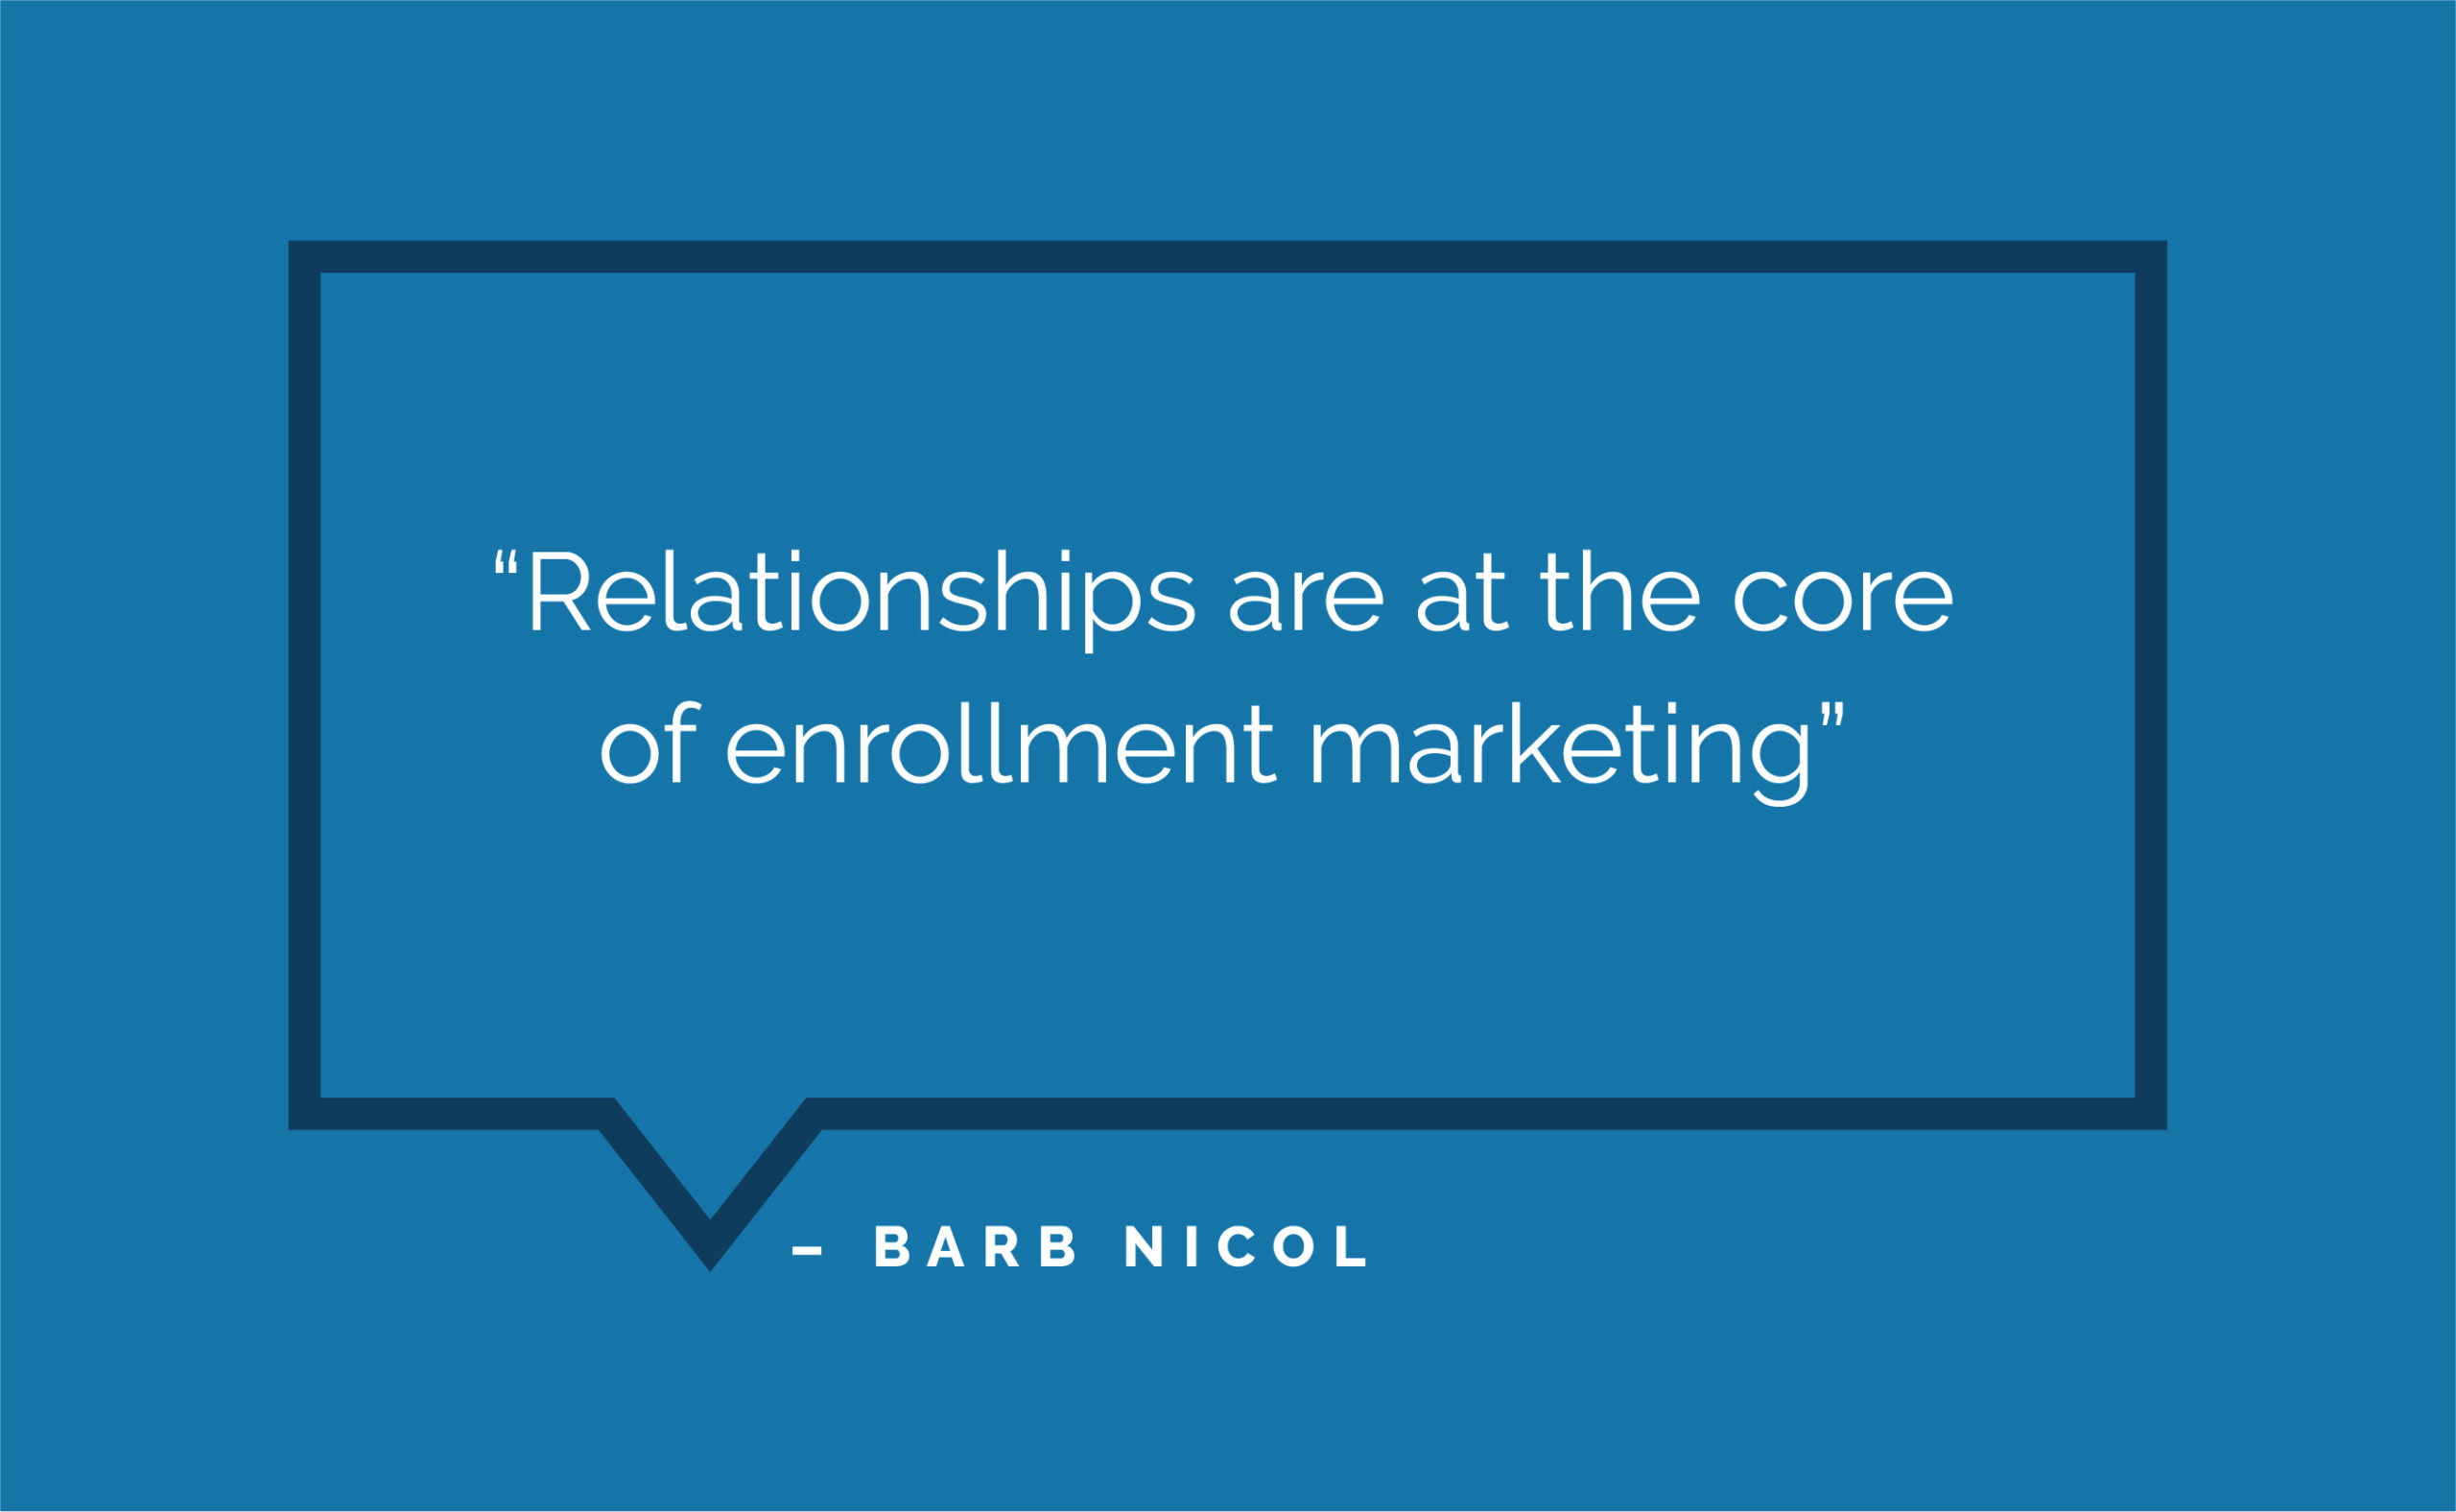 “Relationships are at the core of enrollment marketing” - Barb Nicol